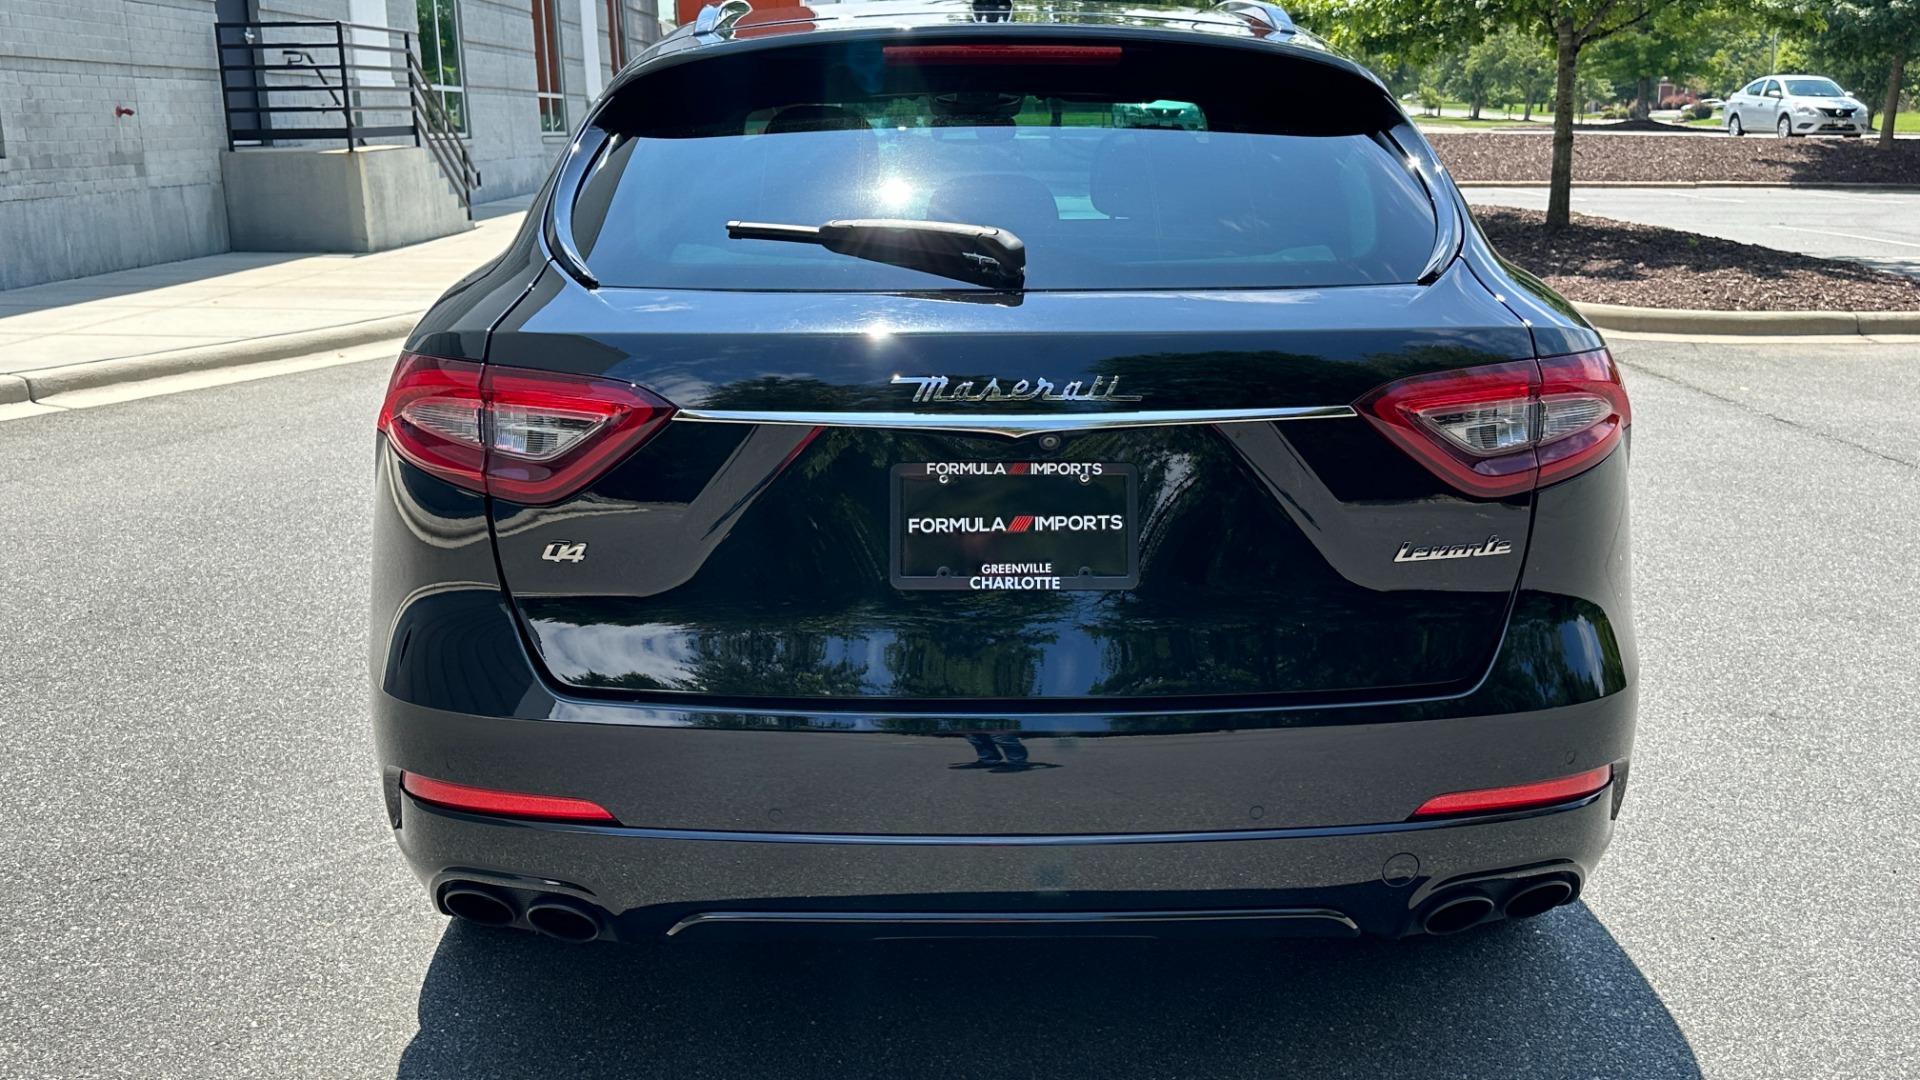 Used 2019 Maserati Levante HK SOUND / GLOSS 21IN WHEELS / PANORAMIC ROOF / DRIVER ASSIST / MORE!! for sale $41,995 at Formula Imports in Charlotte NC 28227 10